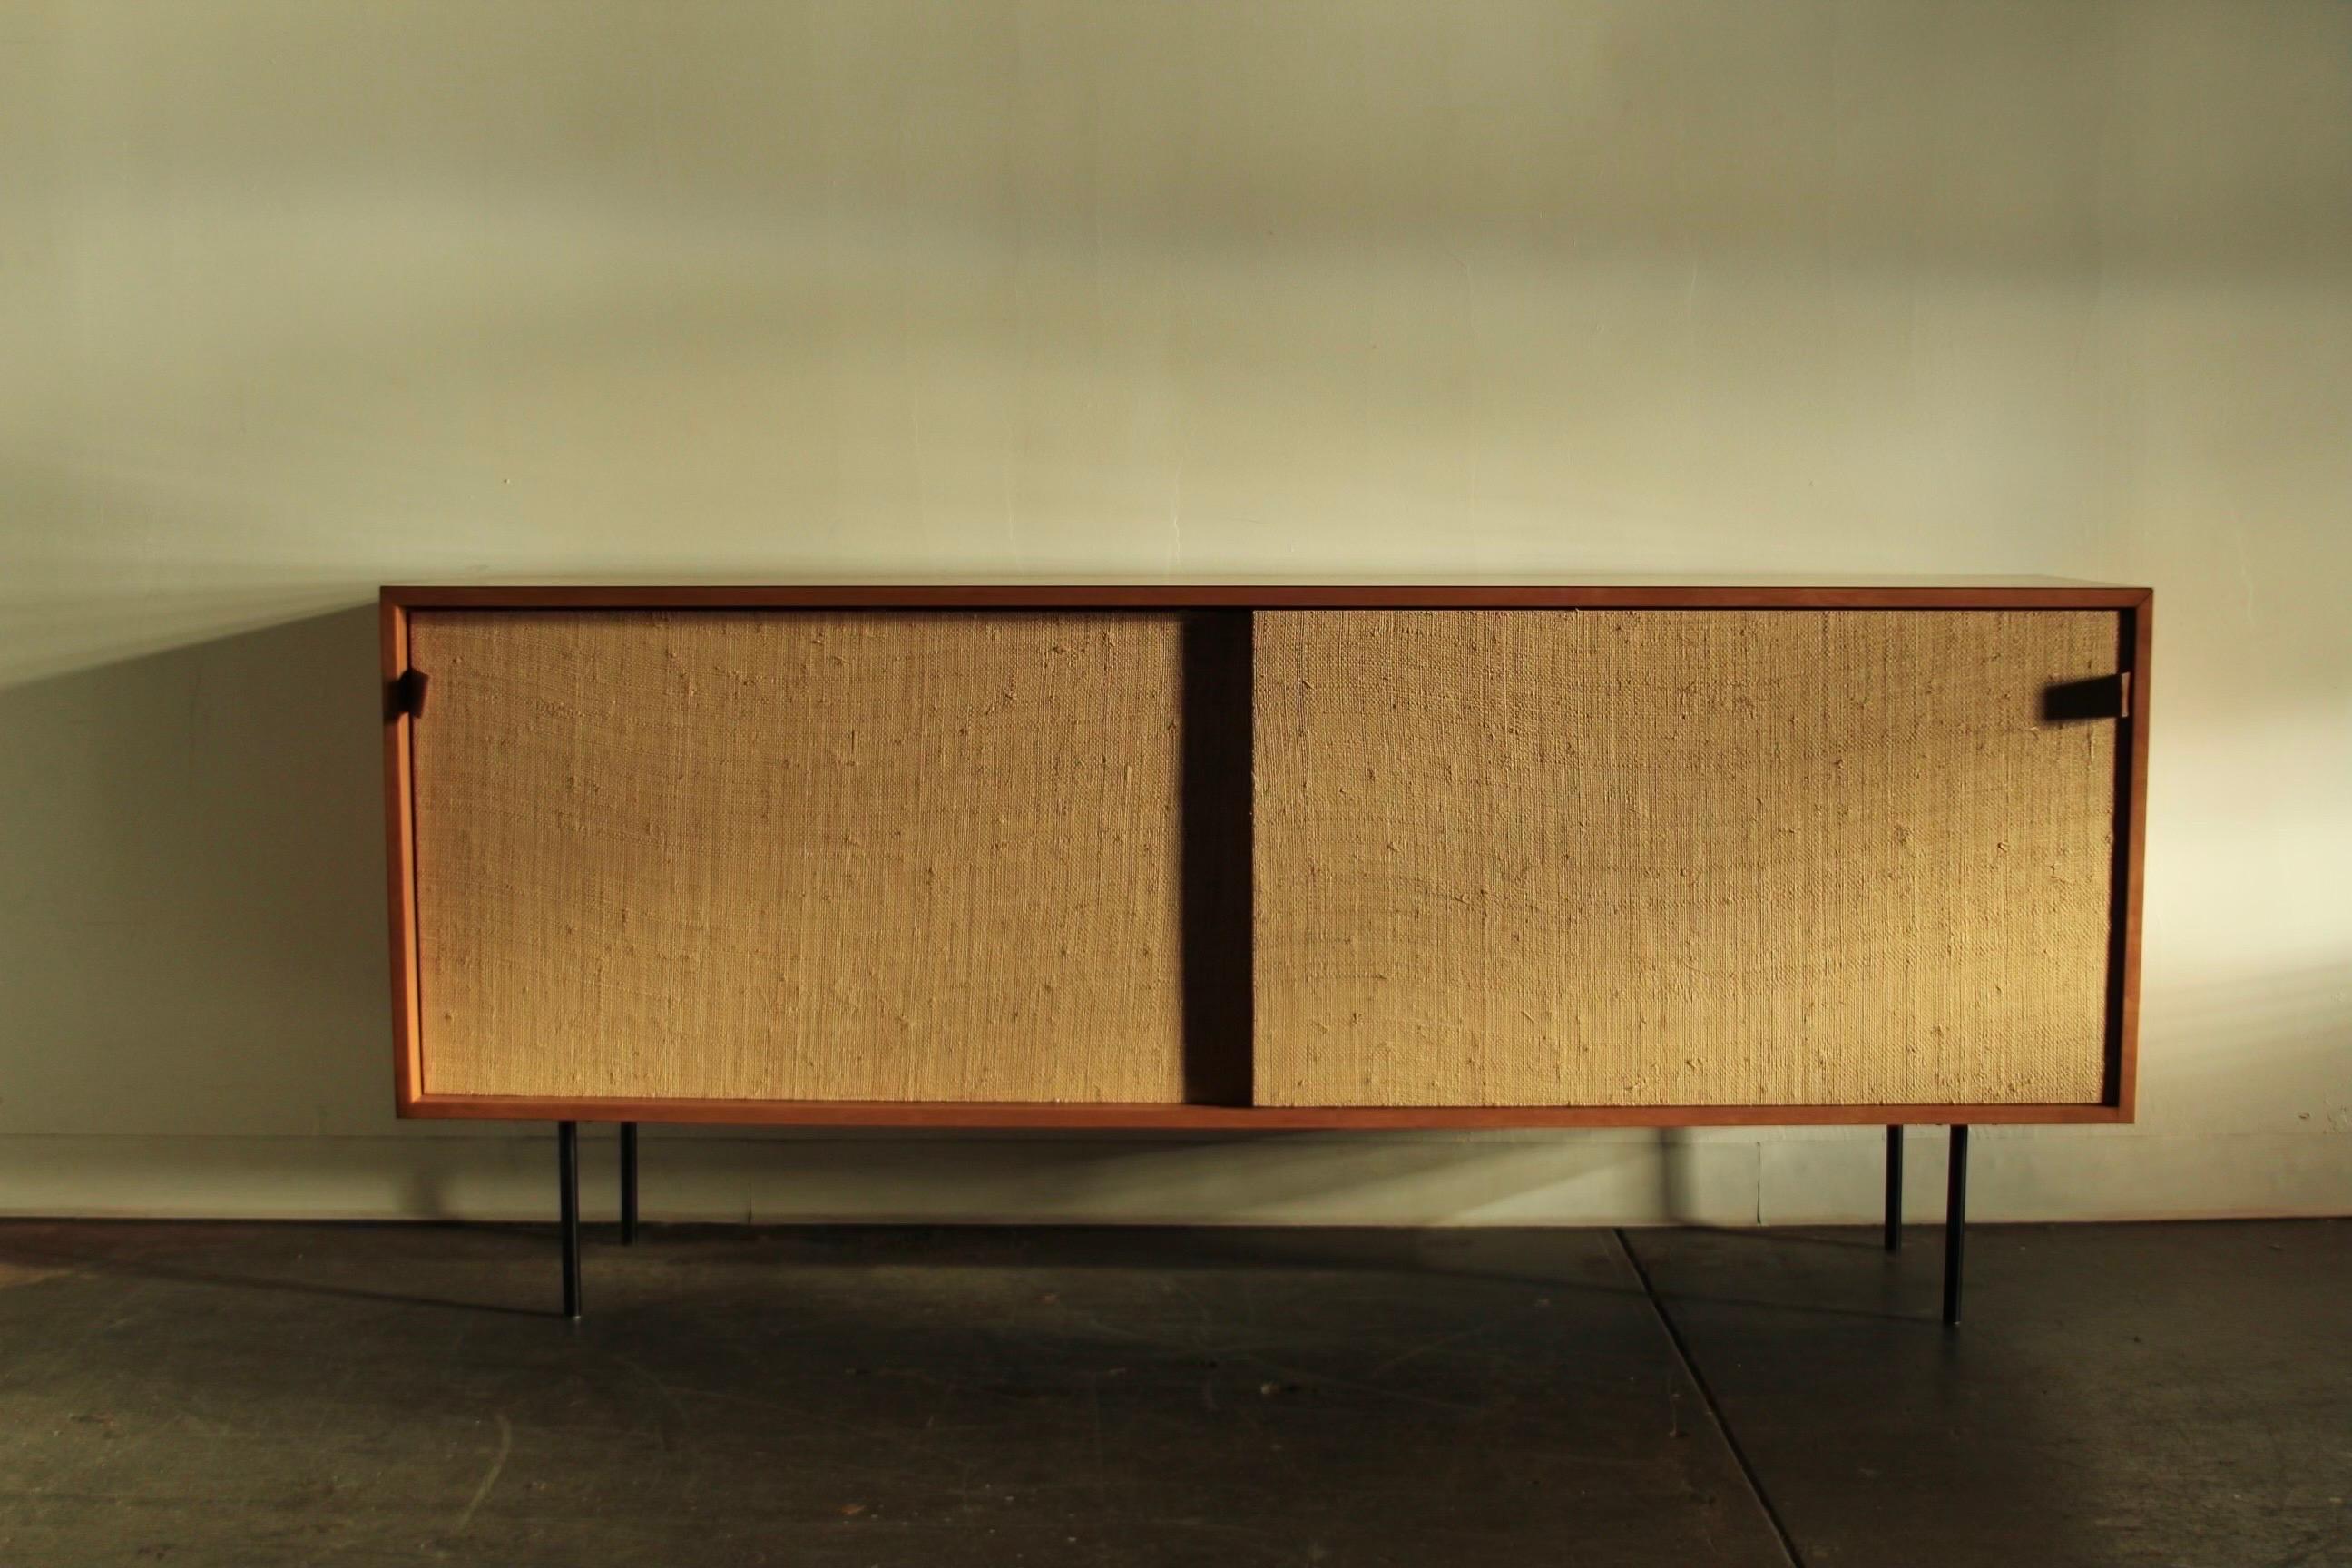 A maple, grasscloth and leather 'Model 116' cabinet designed by Florence Knoll in 1948 for Knoll Associates. The credenza features a pair of sliding doors with grasscloth fronts and stunning, hand stitched saddle leather handles, opening to a white